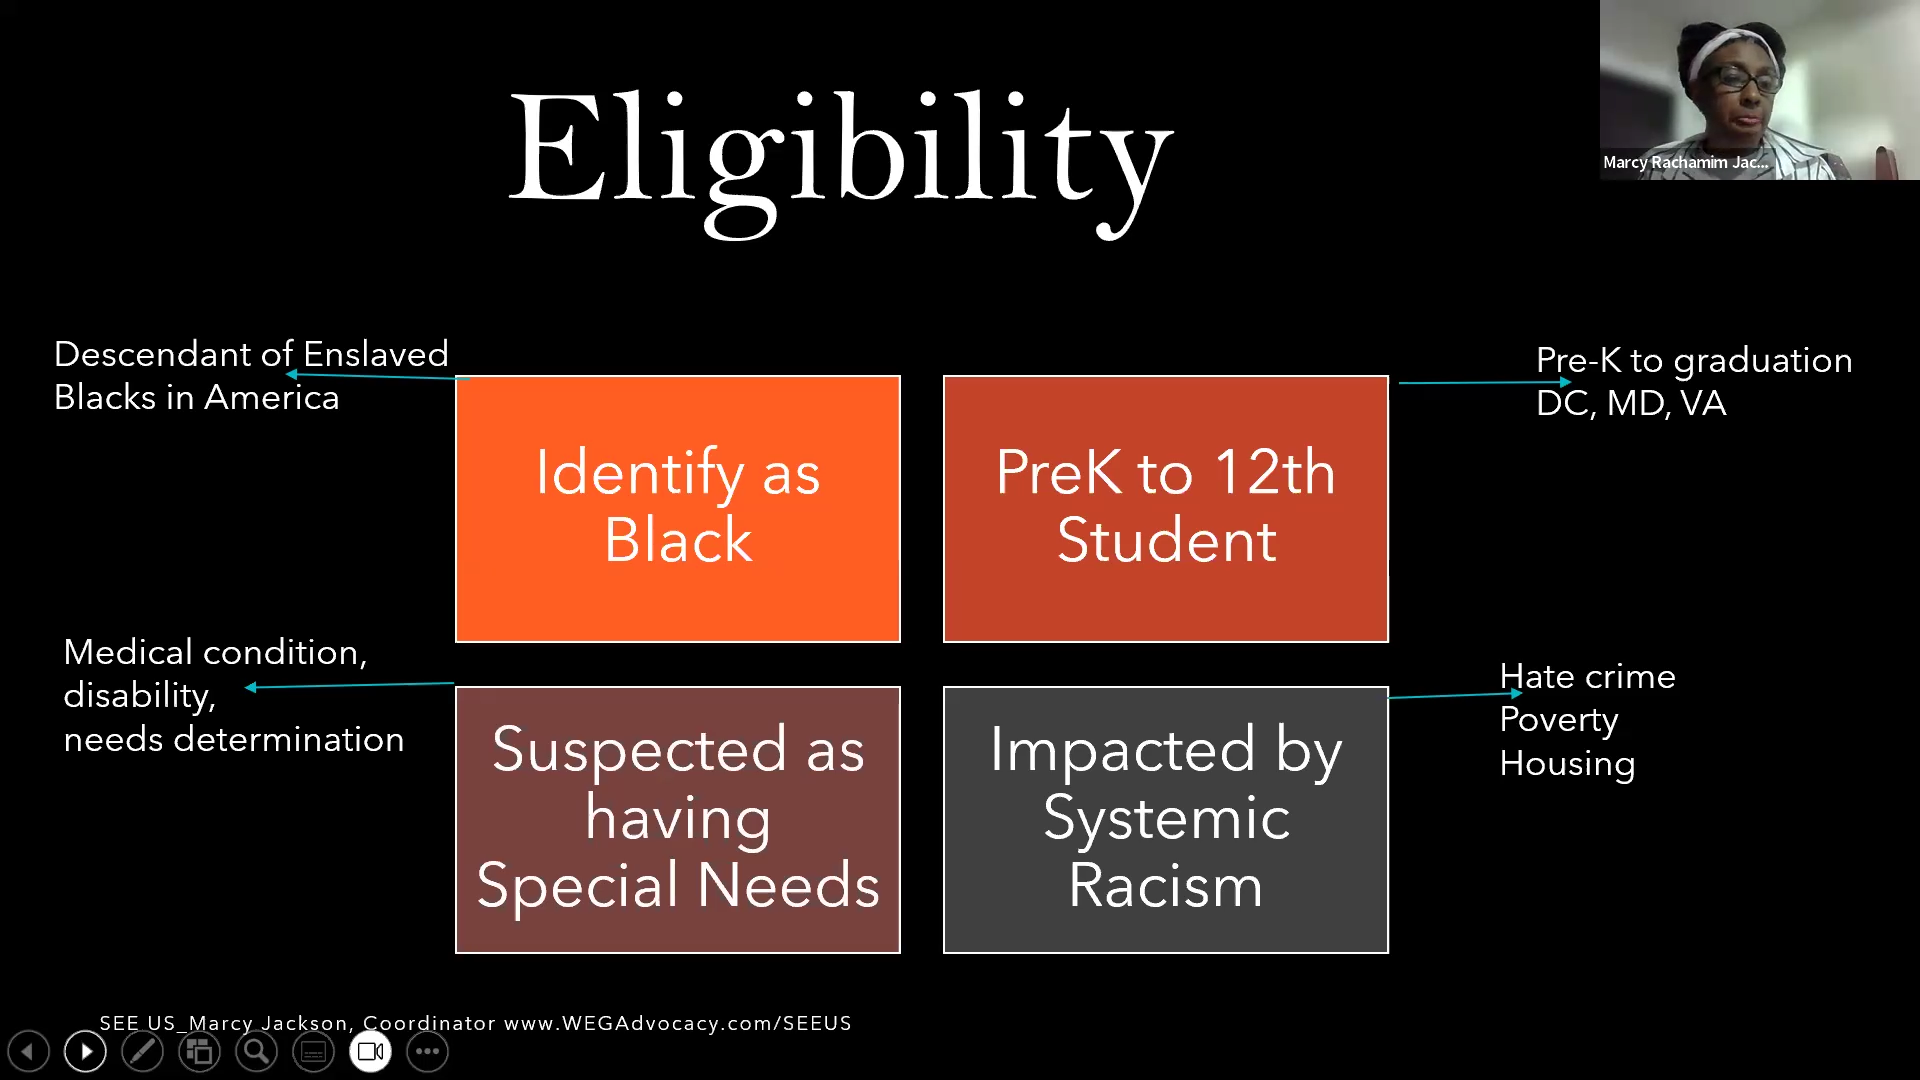 screenshot from webinar on SEE US, with eligibility requirements